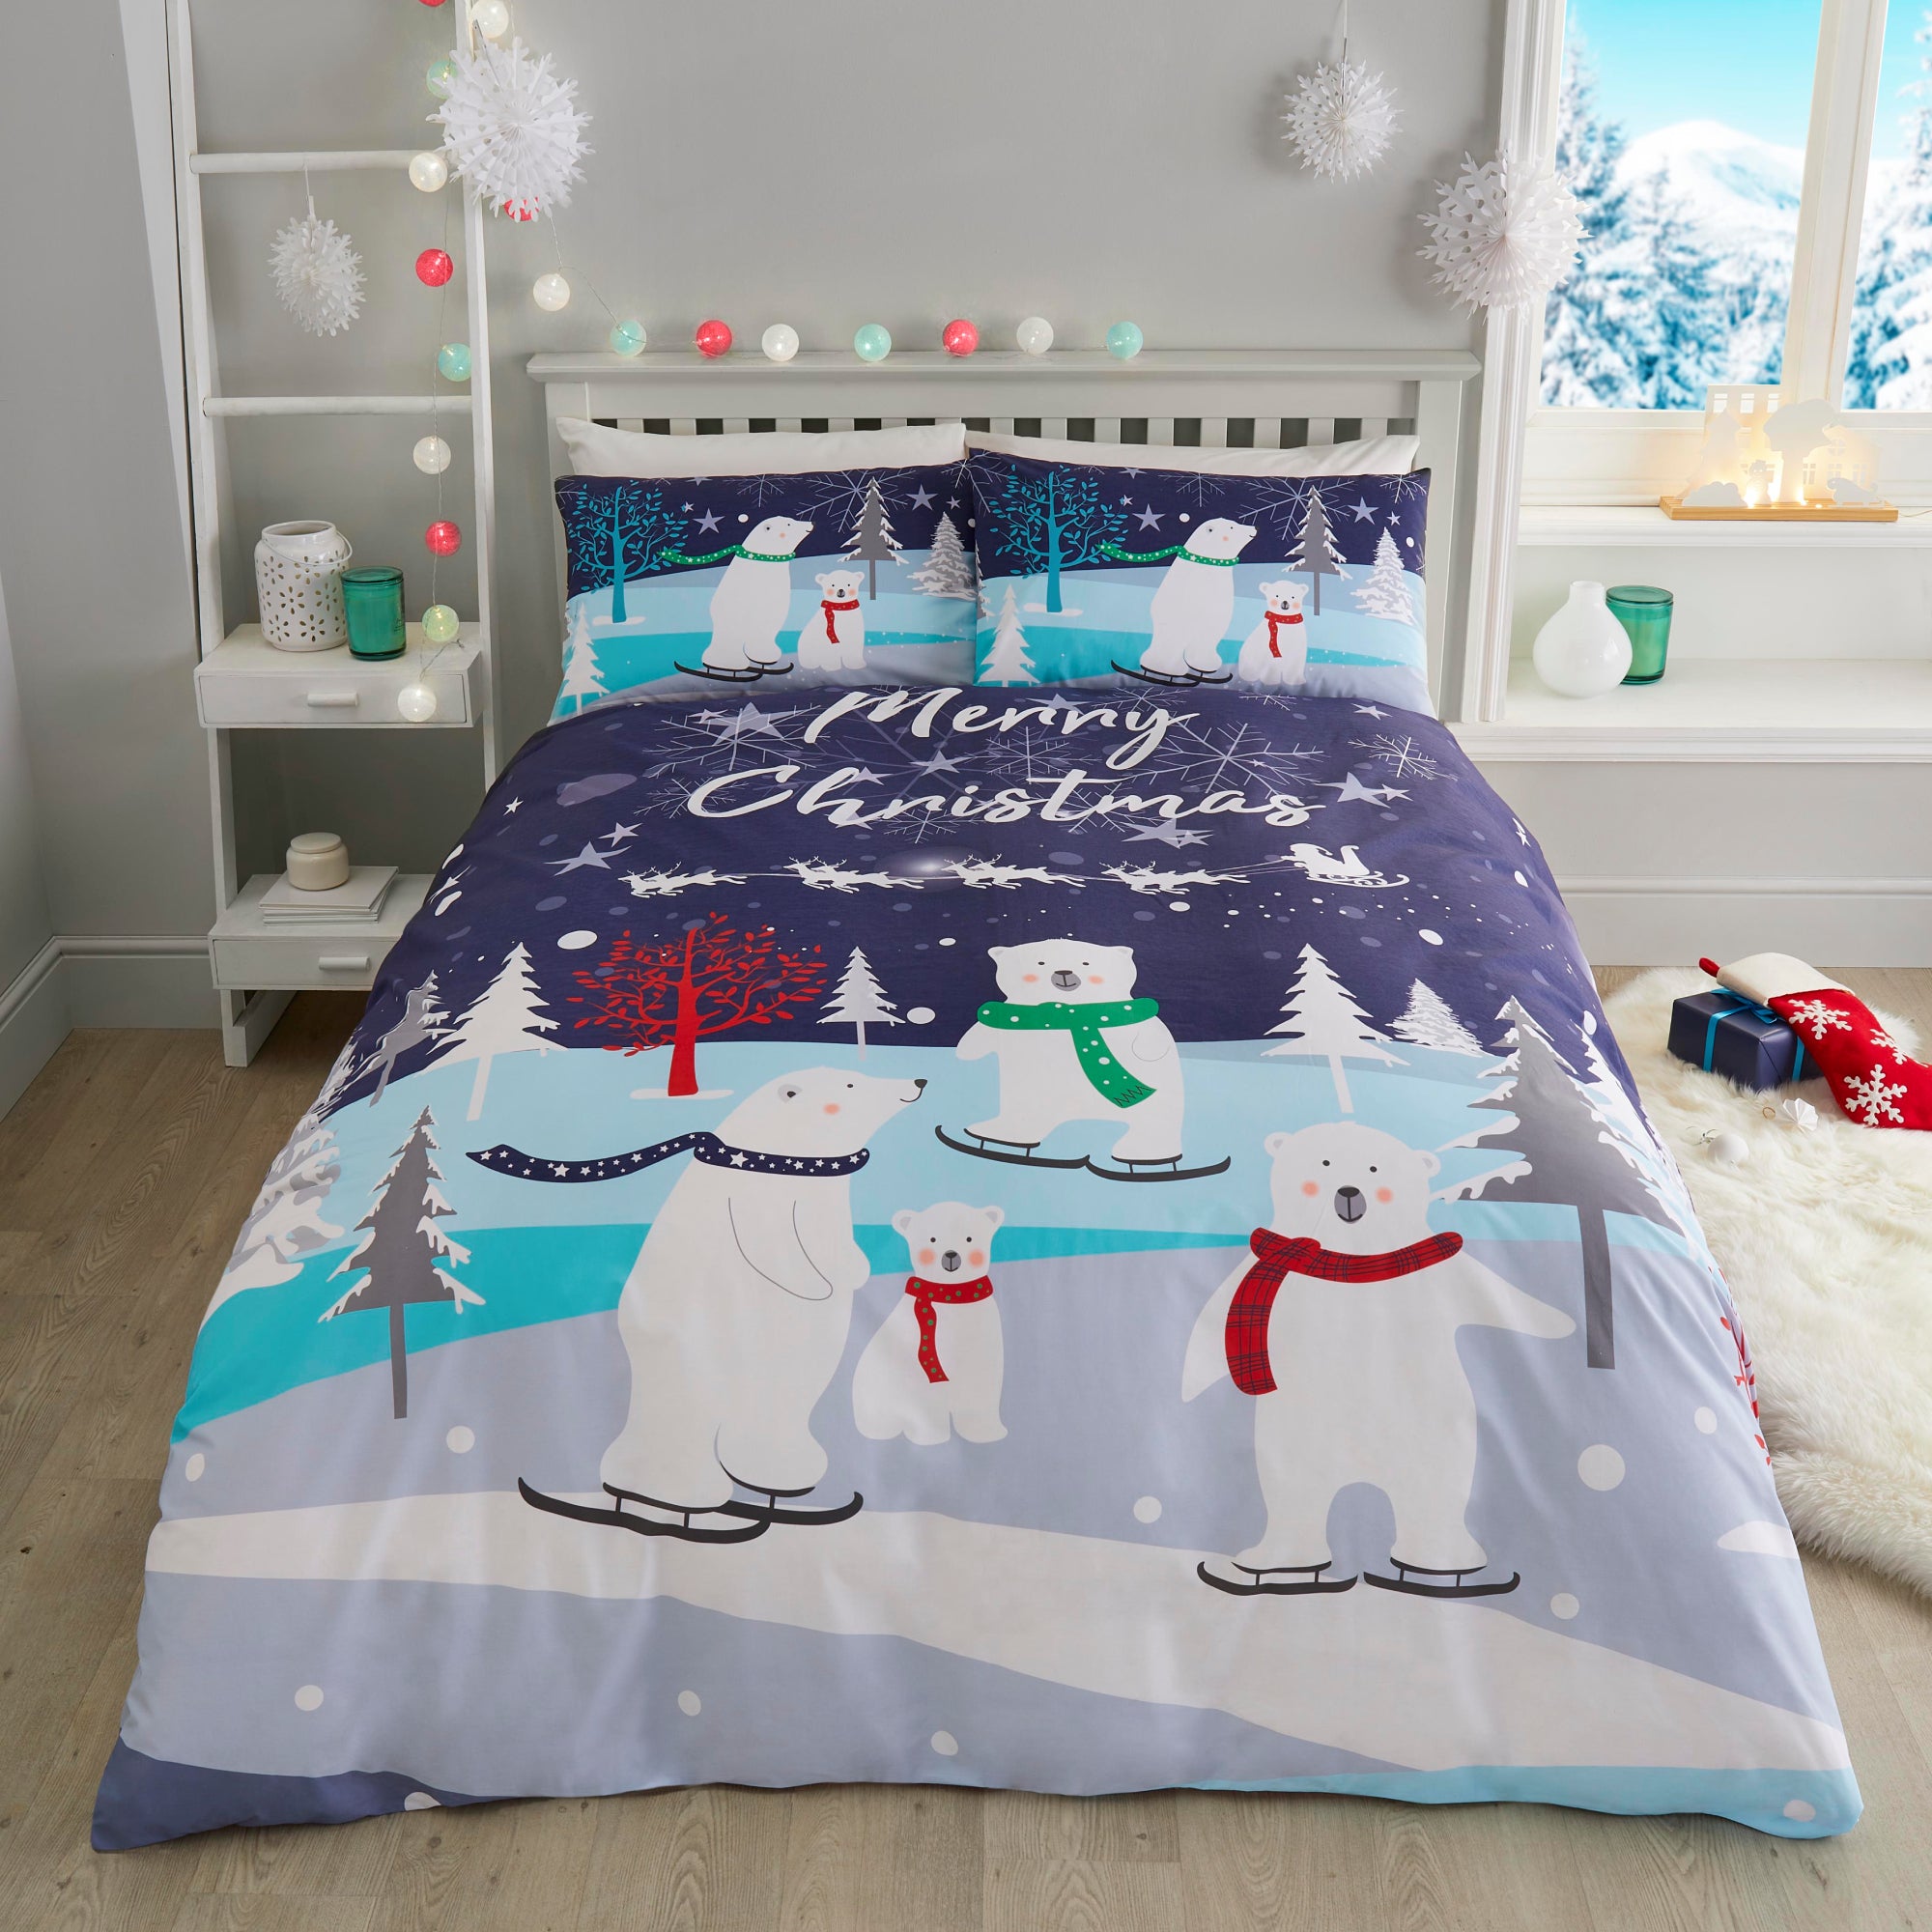 Duvet Cover Set Christmas Bears by Fusion Christmas in Blue